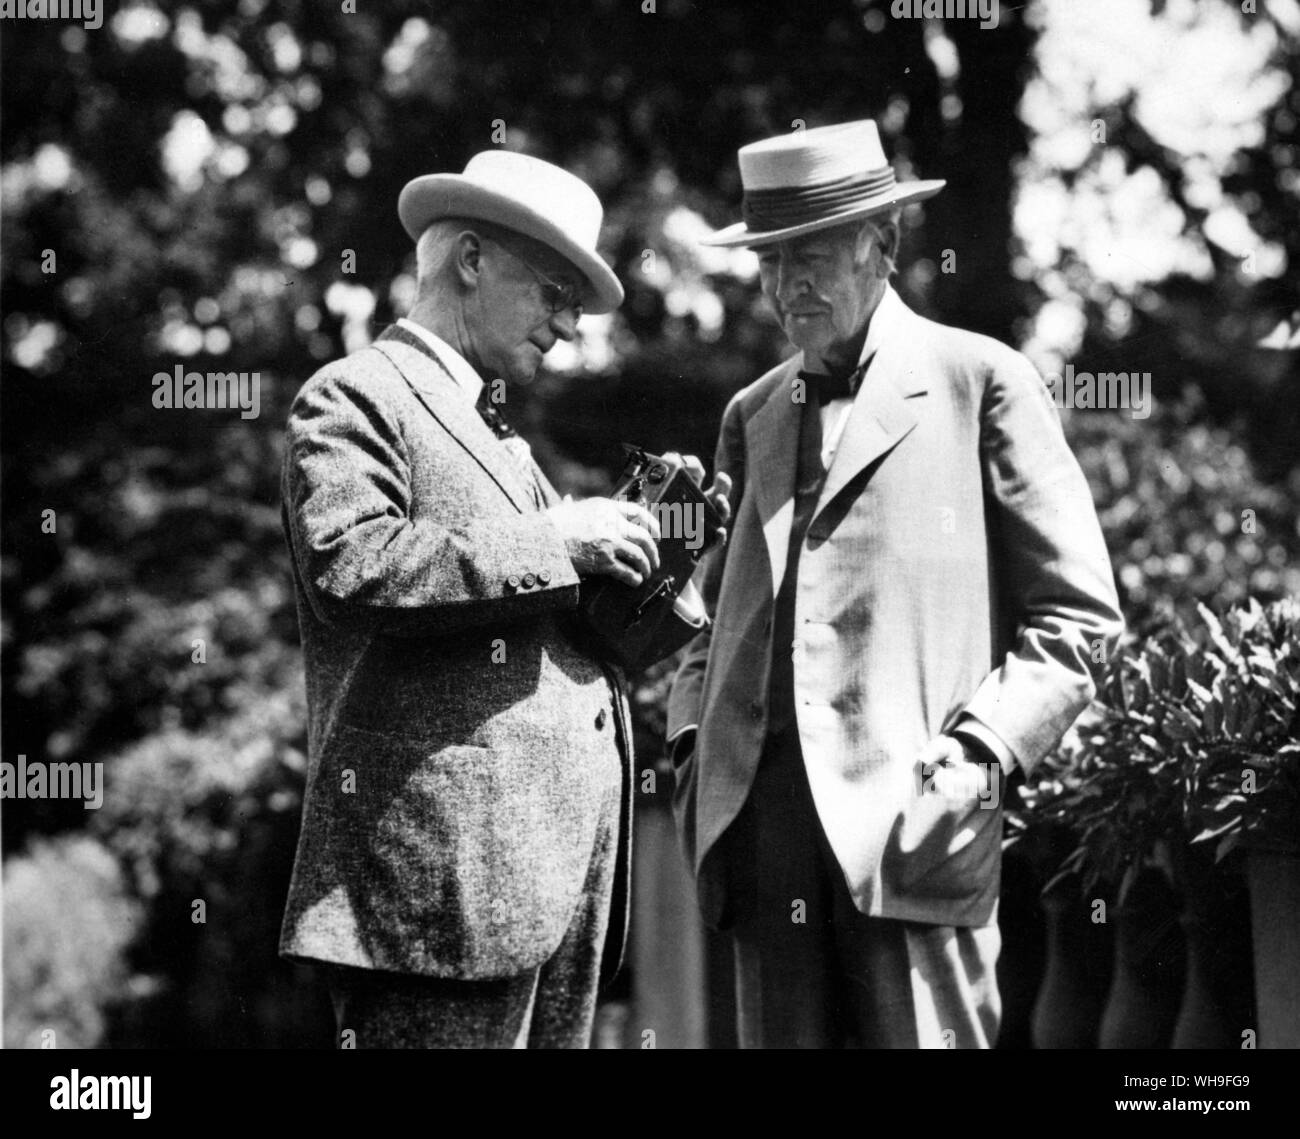 US scientist and inventor, Thomas A Edison (1847-1931) (right) with George Eastman (1854-1932). The latter founded the Kodak-Eastman photographic company in 1892. Stock Photo